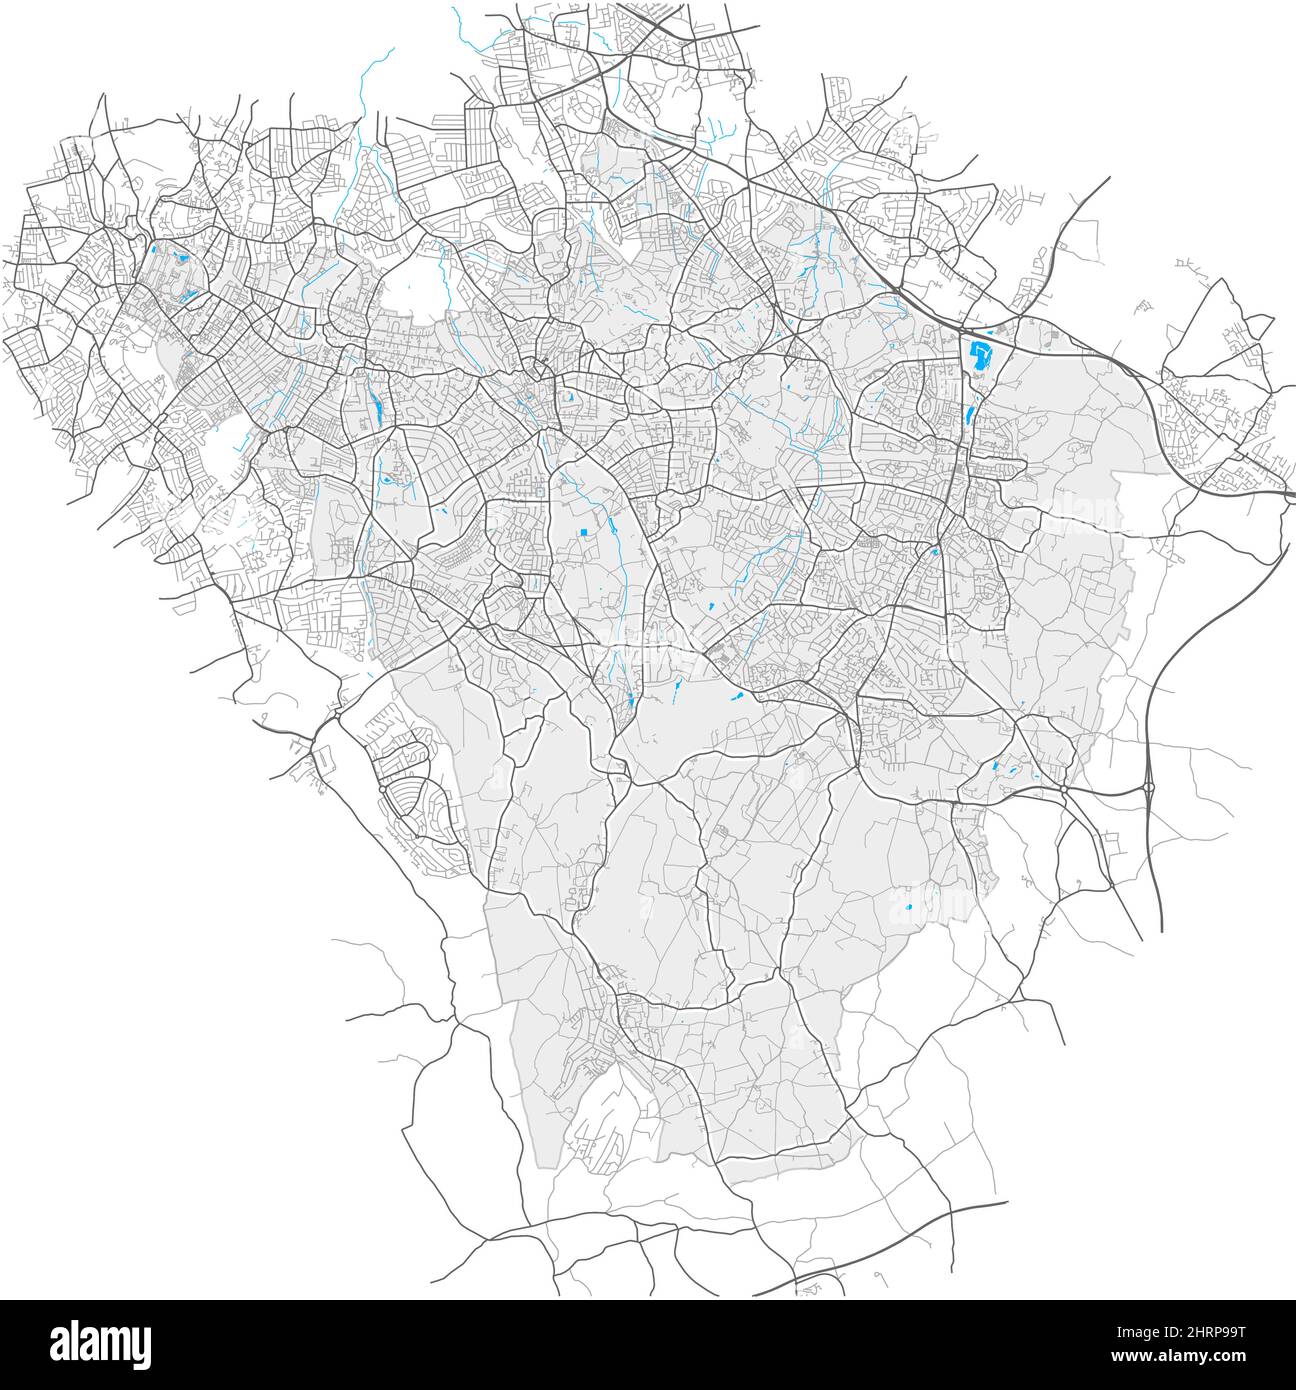 Bromley, Greater London, United Kingdom, high detail vector map with city boundaries and editable paths. White outlines for main roads. Many smaller p Stock Vector